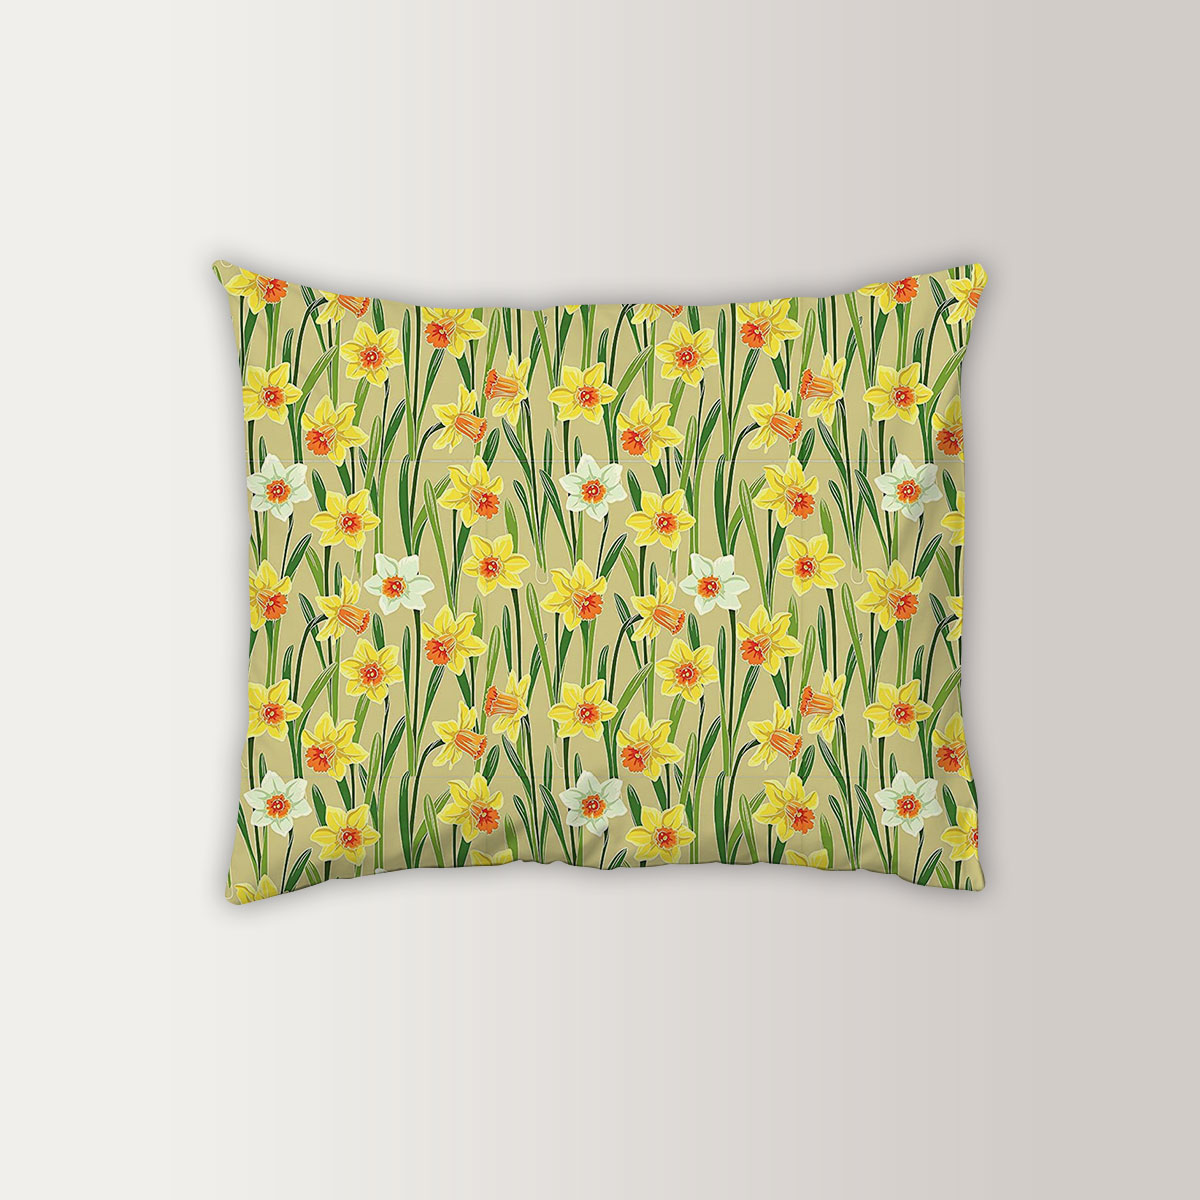 Yellow Jonquil Daffodil Narcissus Pillow Case